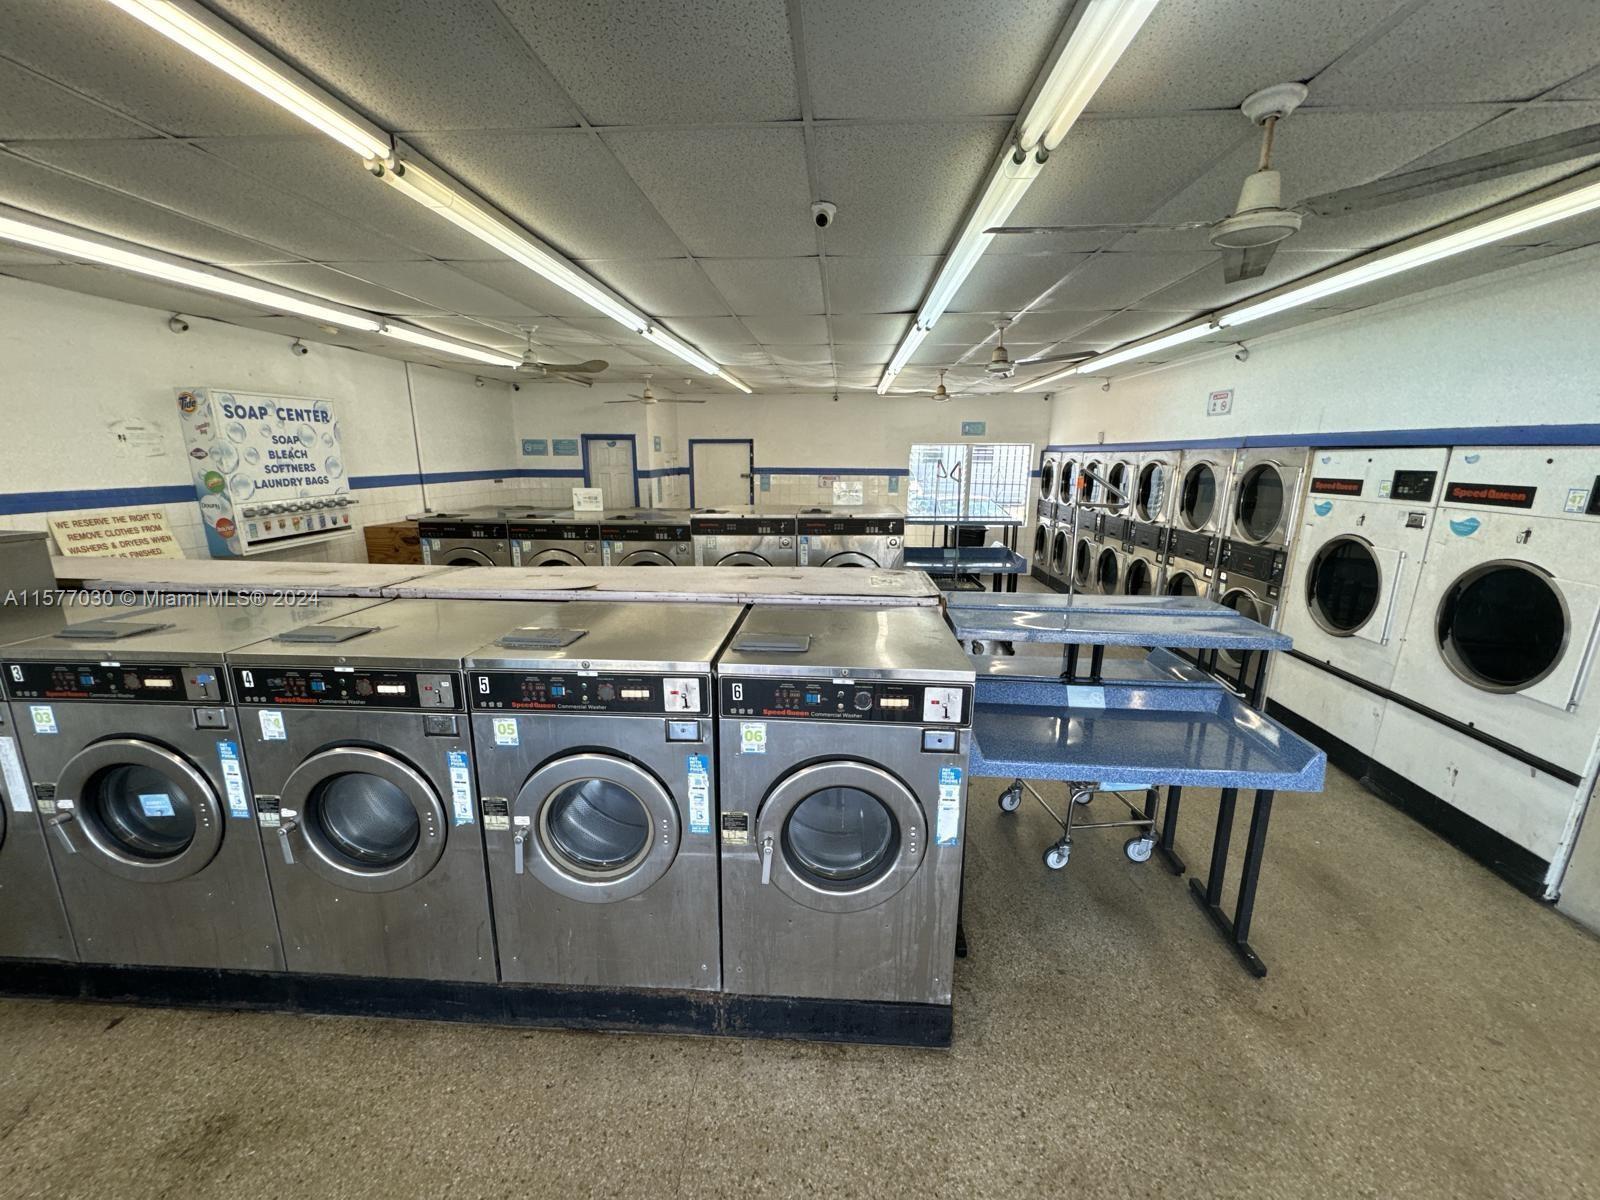 Profitable automated laundry business for sale, featuring state-of-the-art equipment worth approxima